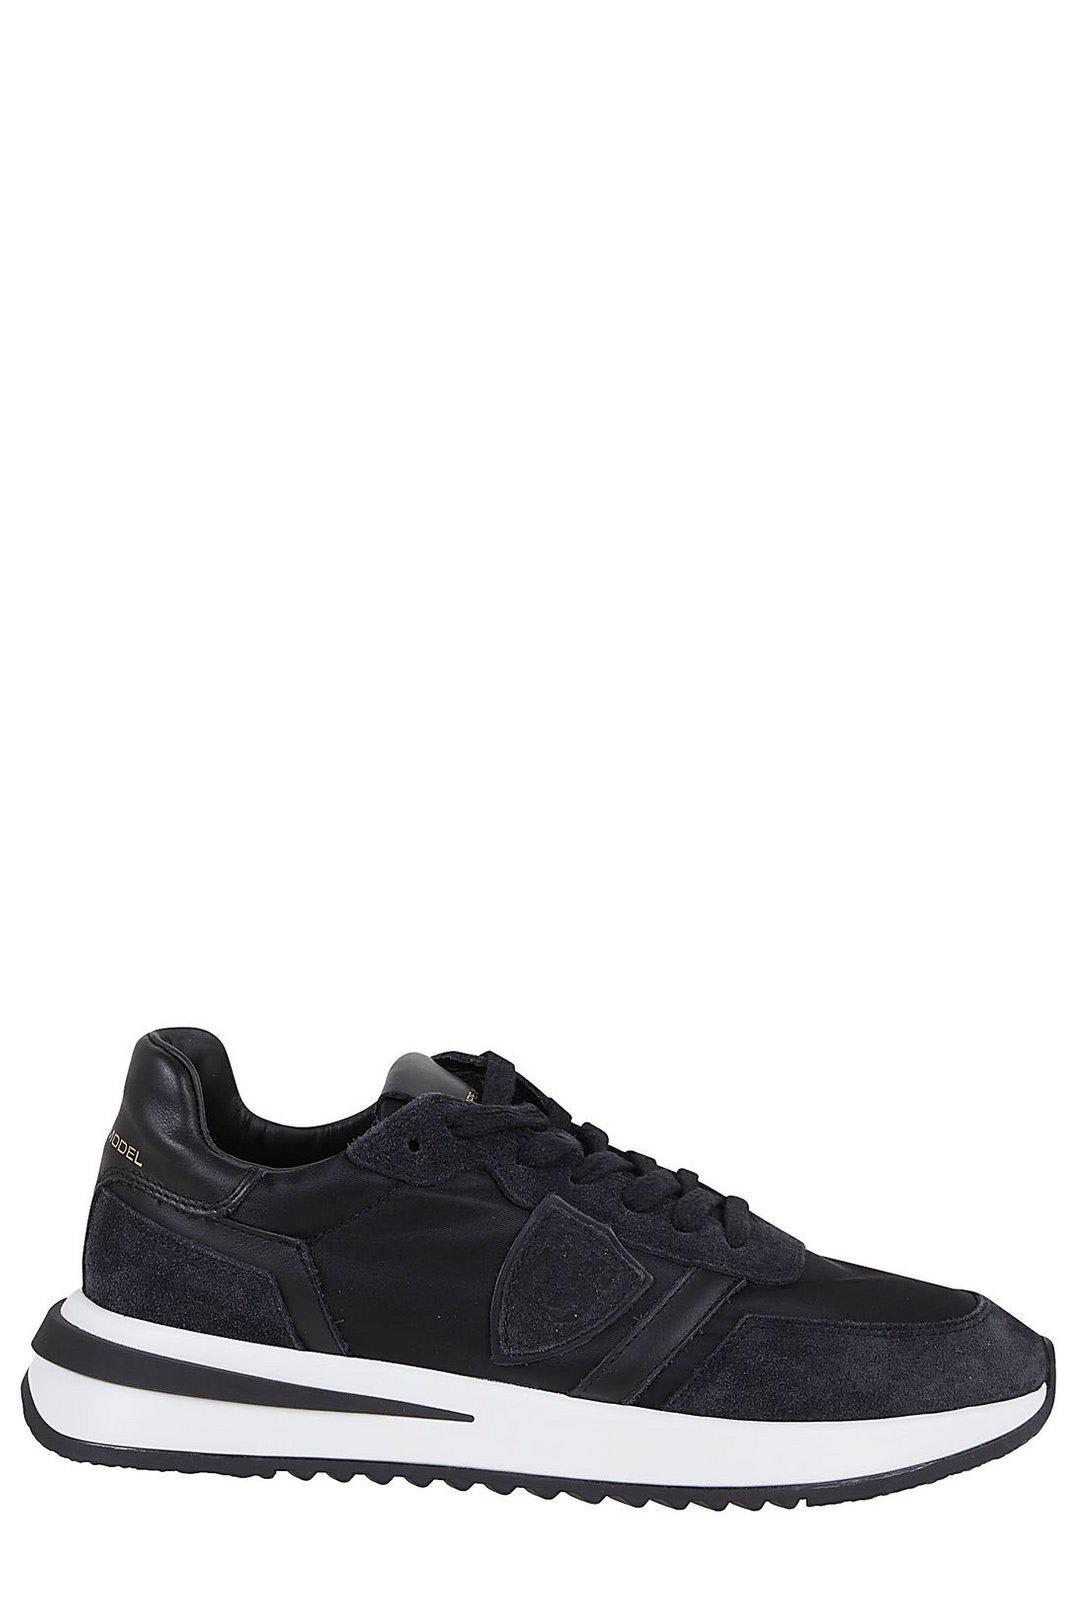 Philippe Model Round Toe Lace-up Sneakers